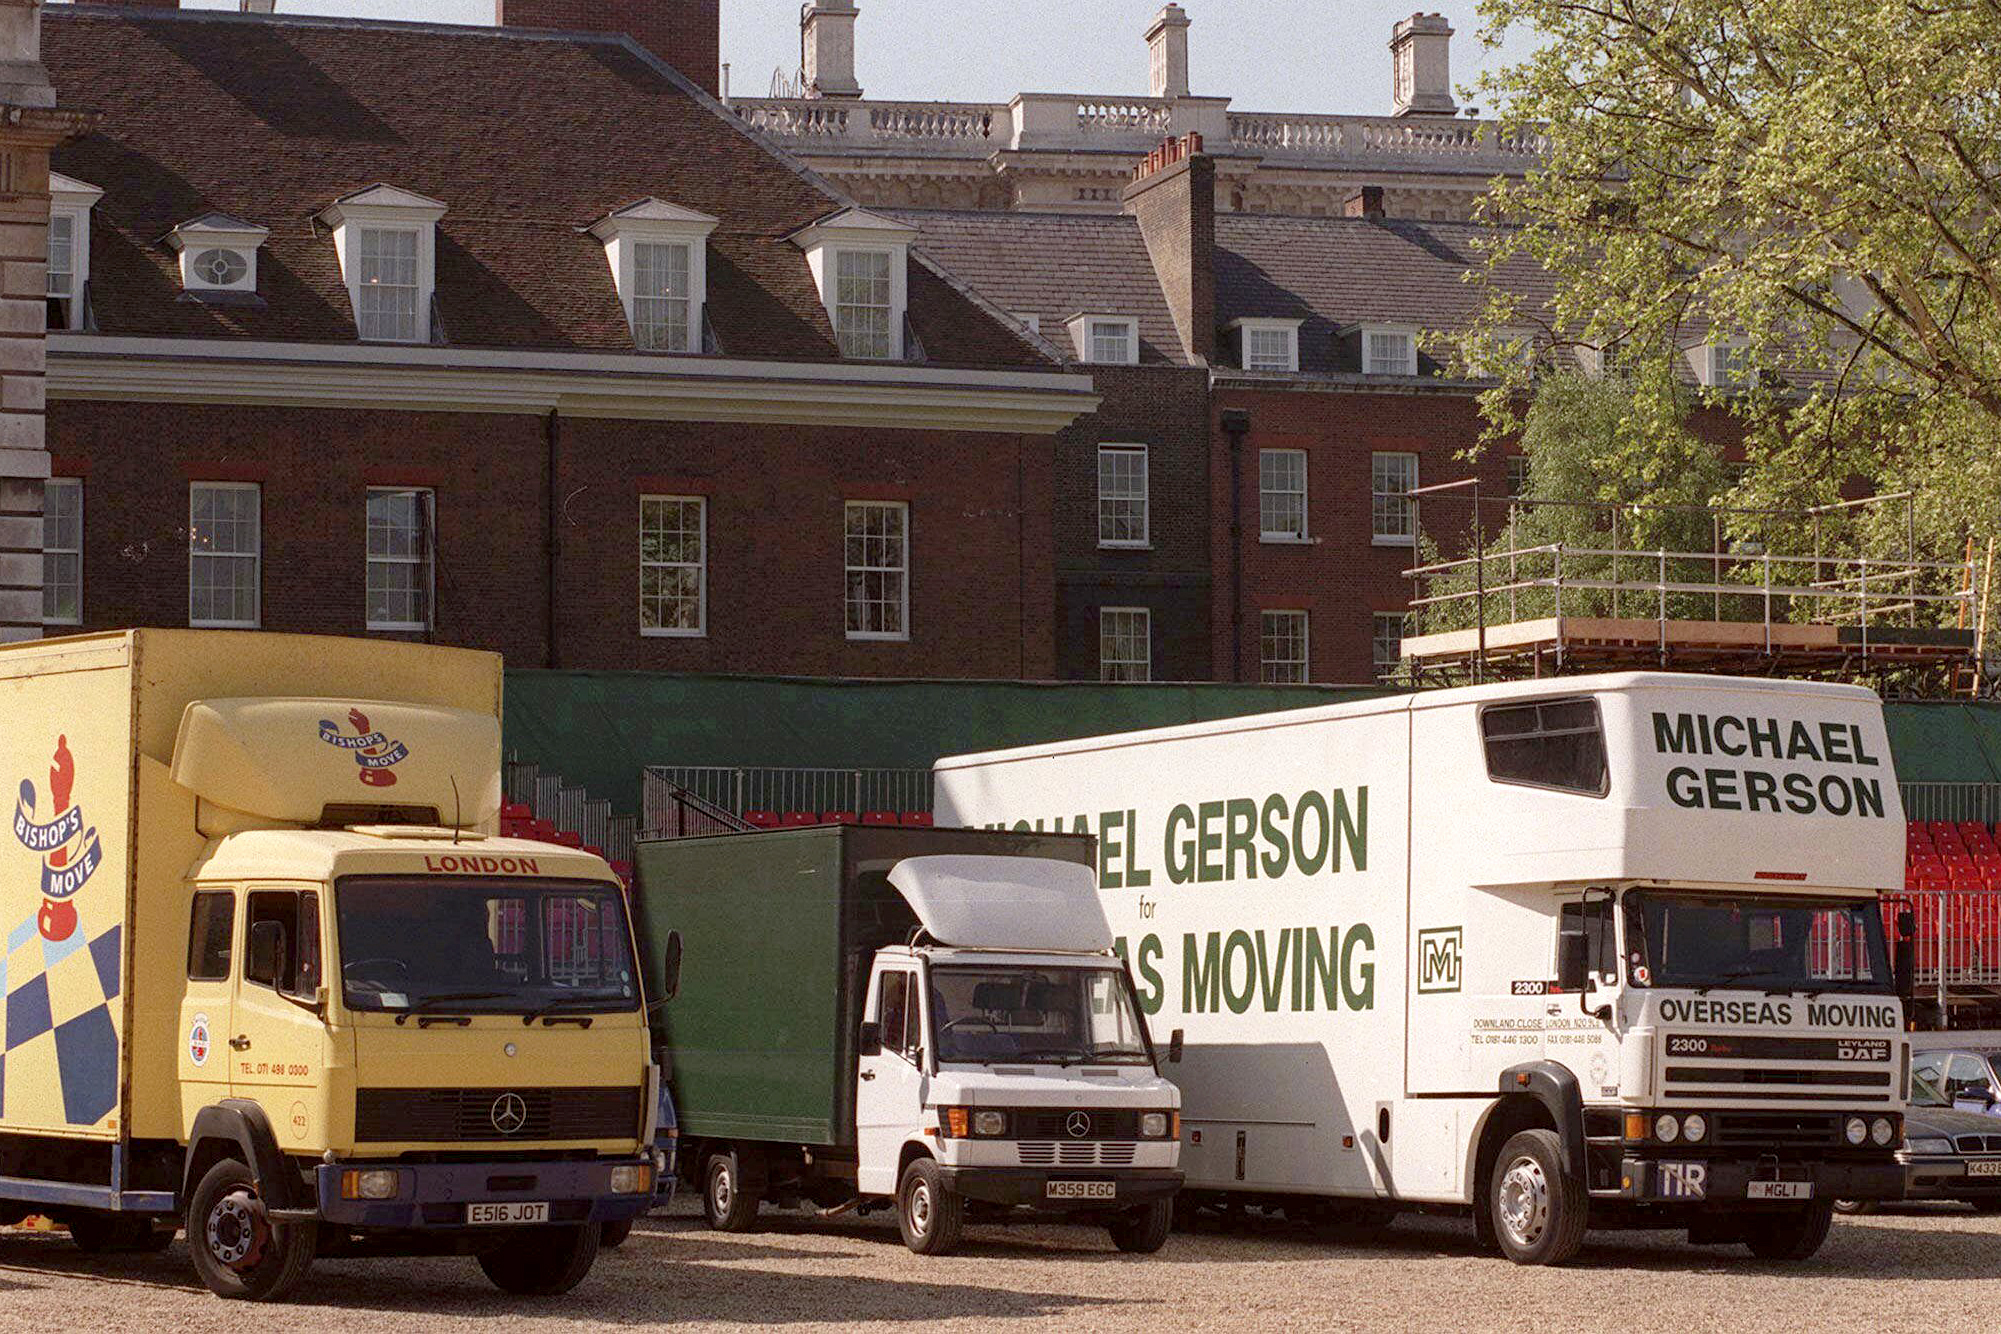 FILE - Removal vans line up at the rear of Downing Street after new Prime Minister Tony Blair replaced outgoing Conservative John Major, in London, on May 2 1997. (AP Photo/Jacqueline Arzt, File)